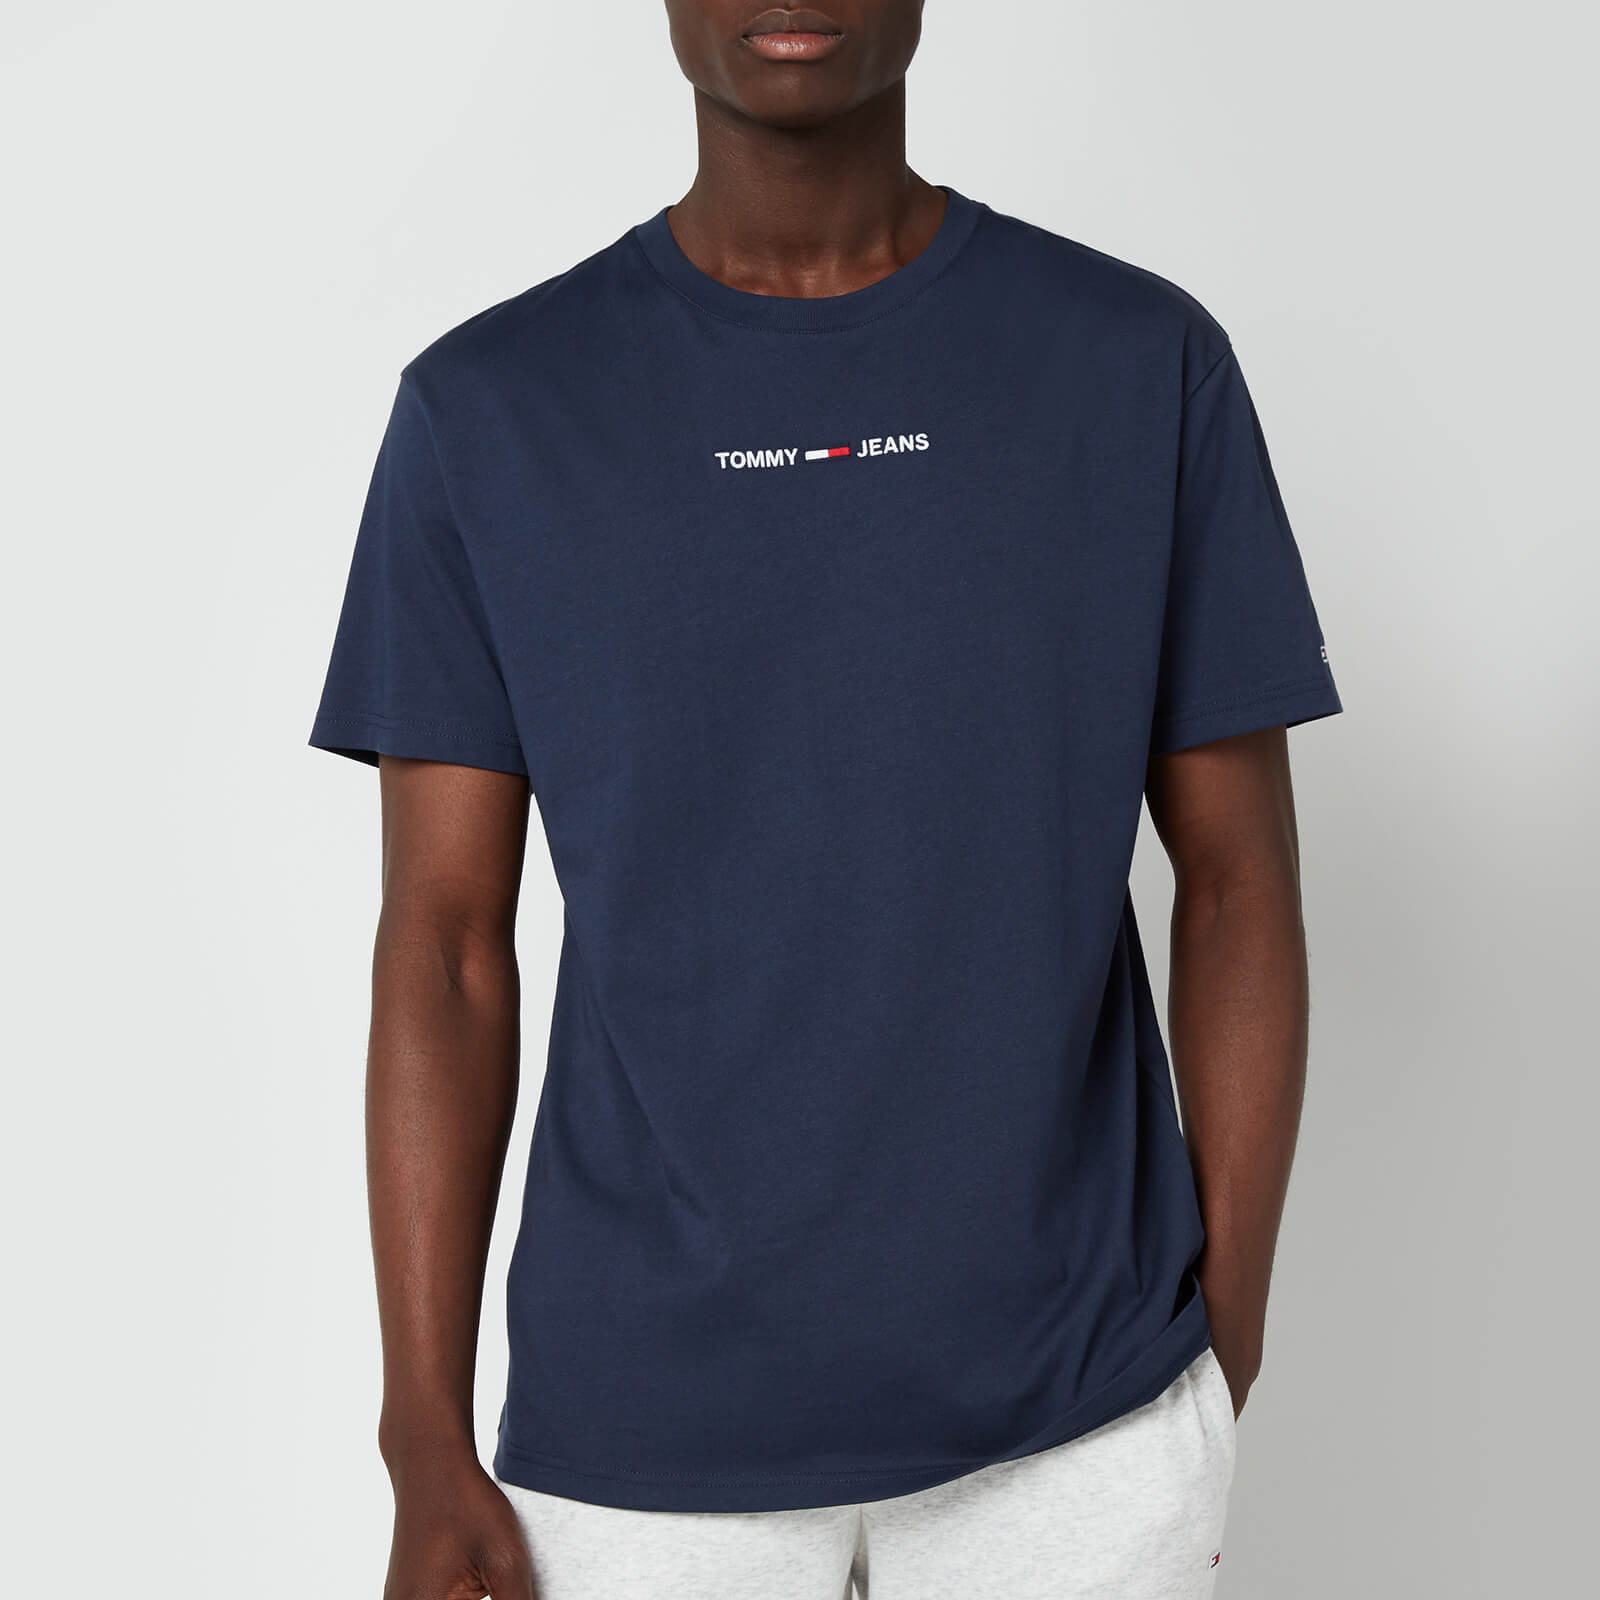 Tommy Jeans Men's Small Text T-Shirt - Twilight Navy